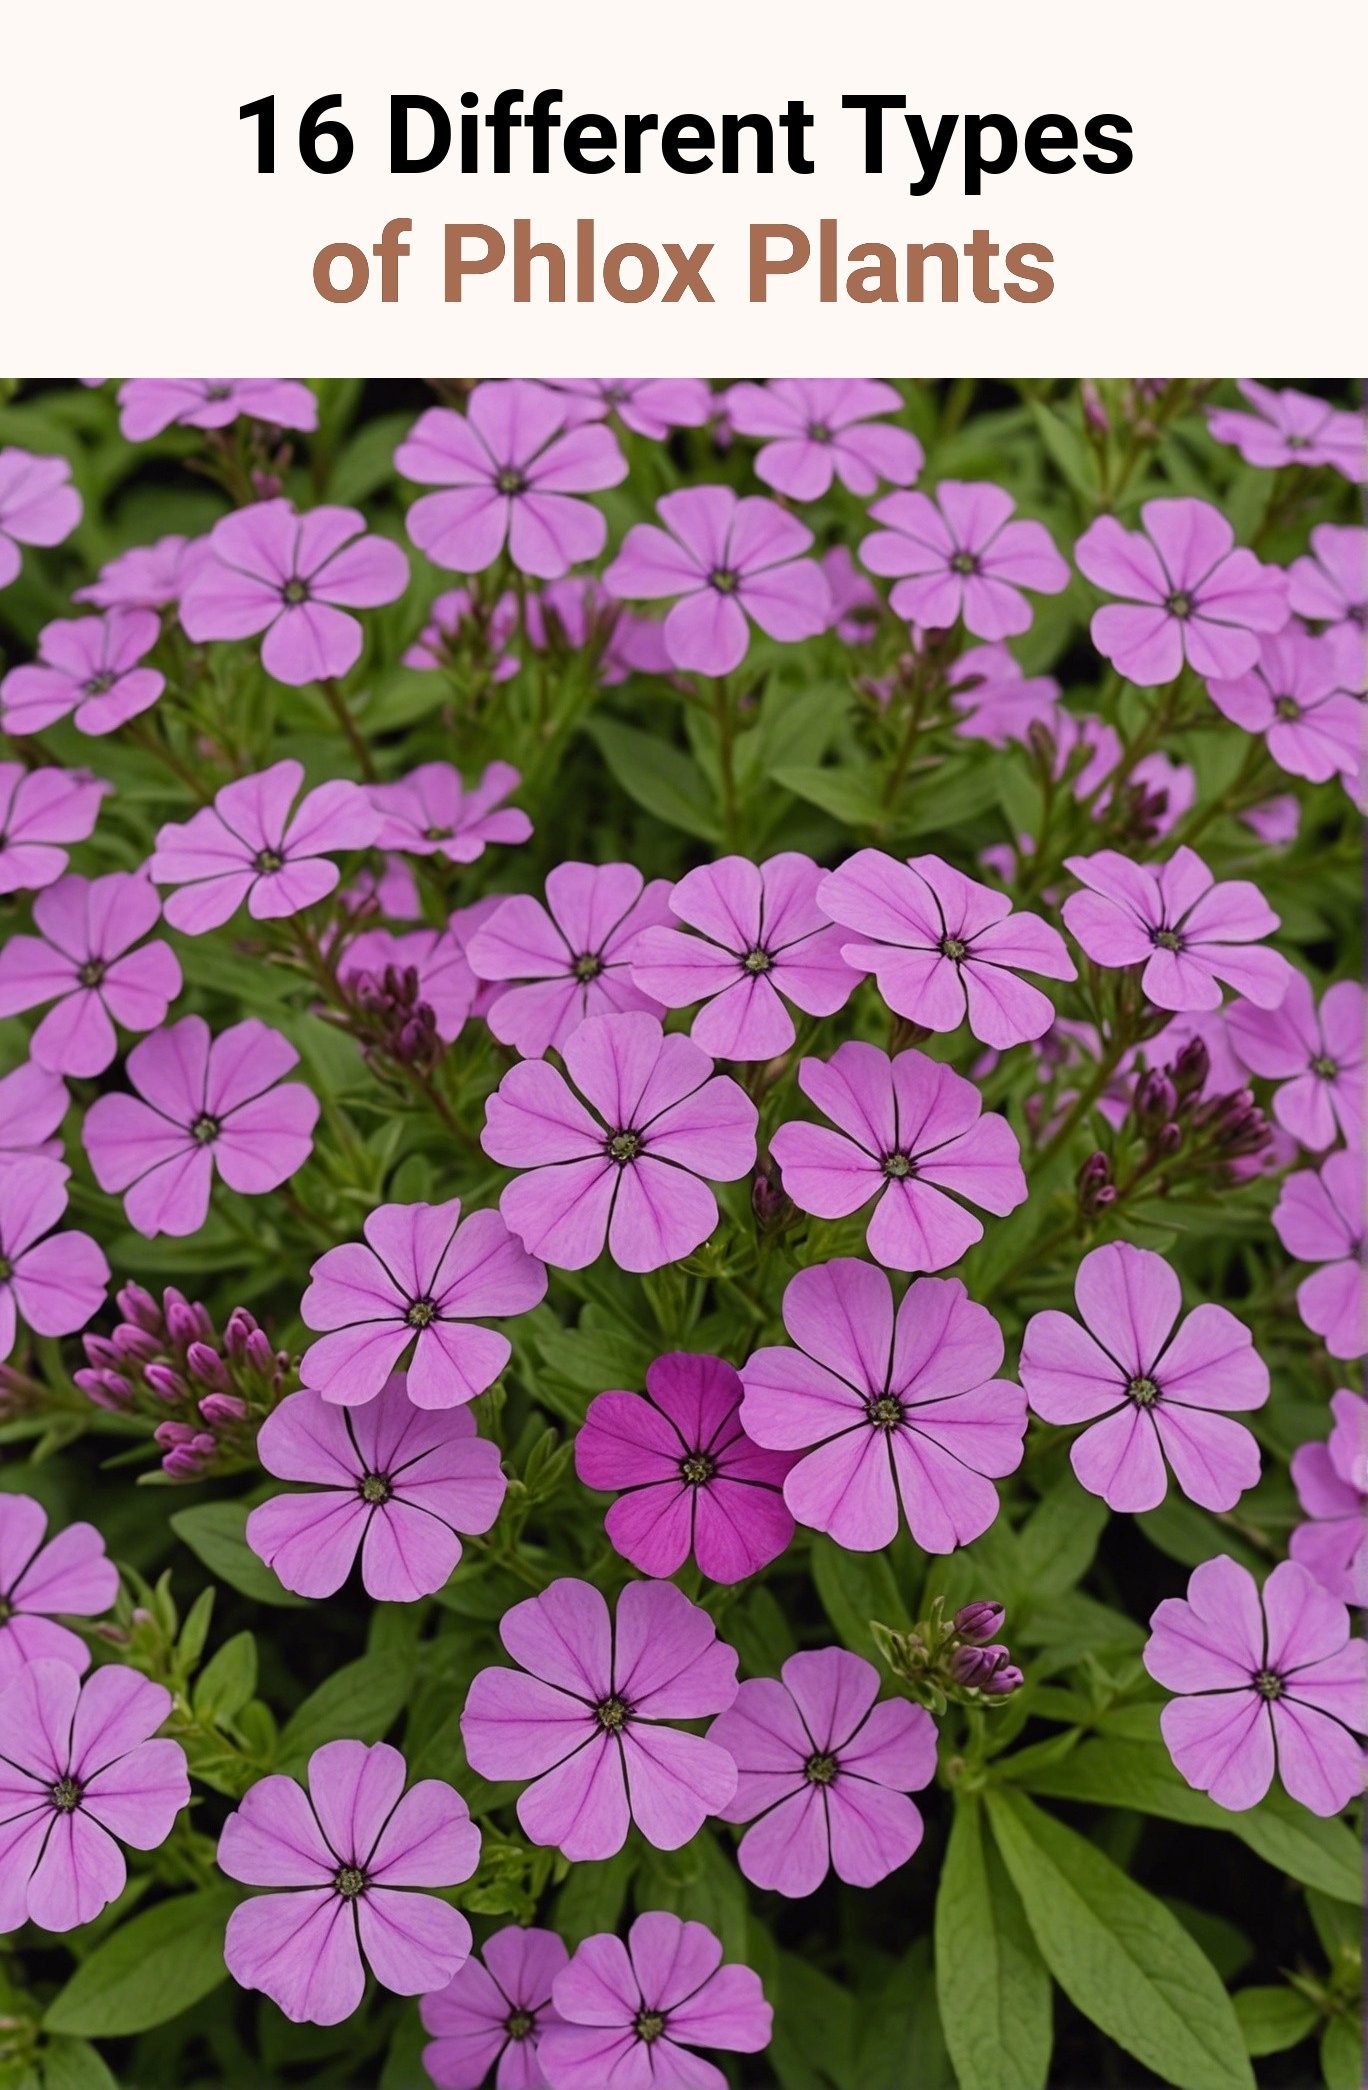 16 Different Types of Phlox Plants